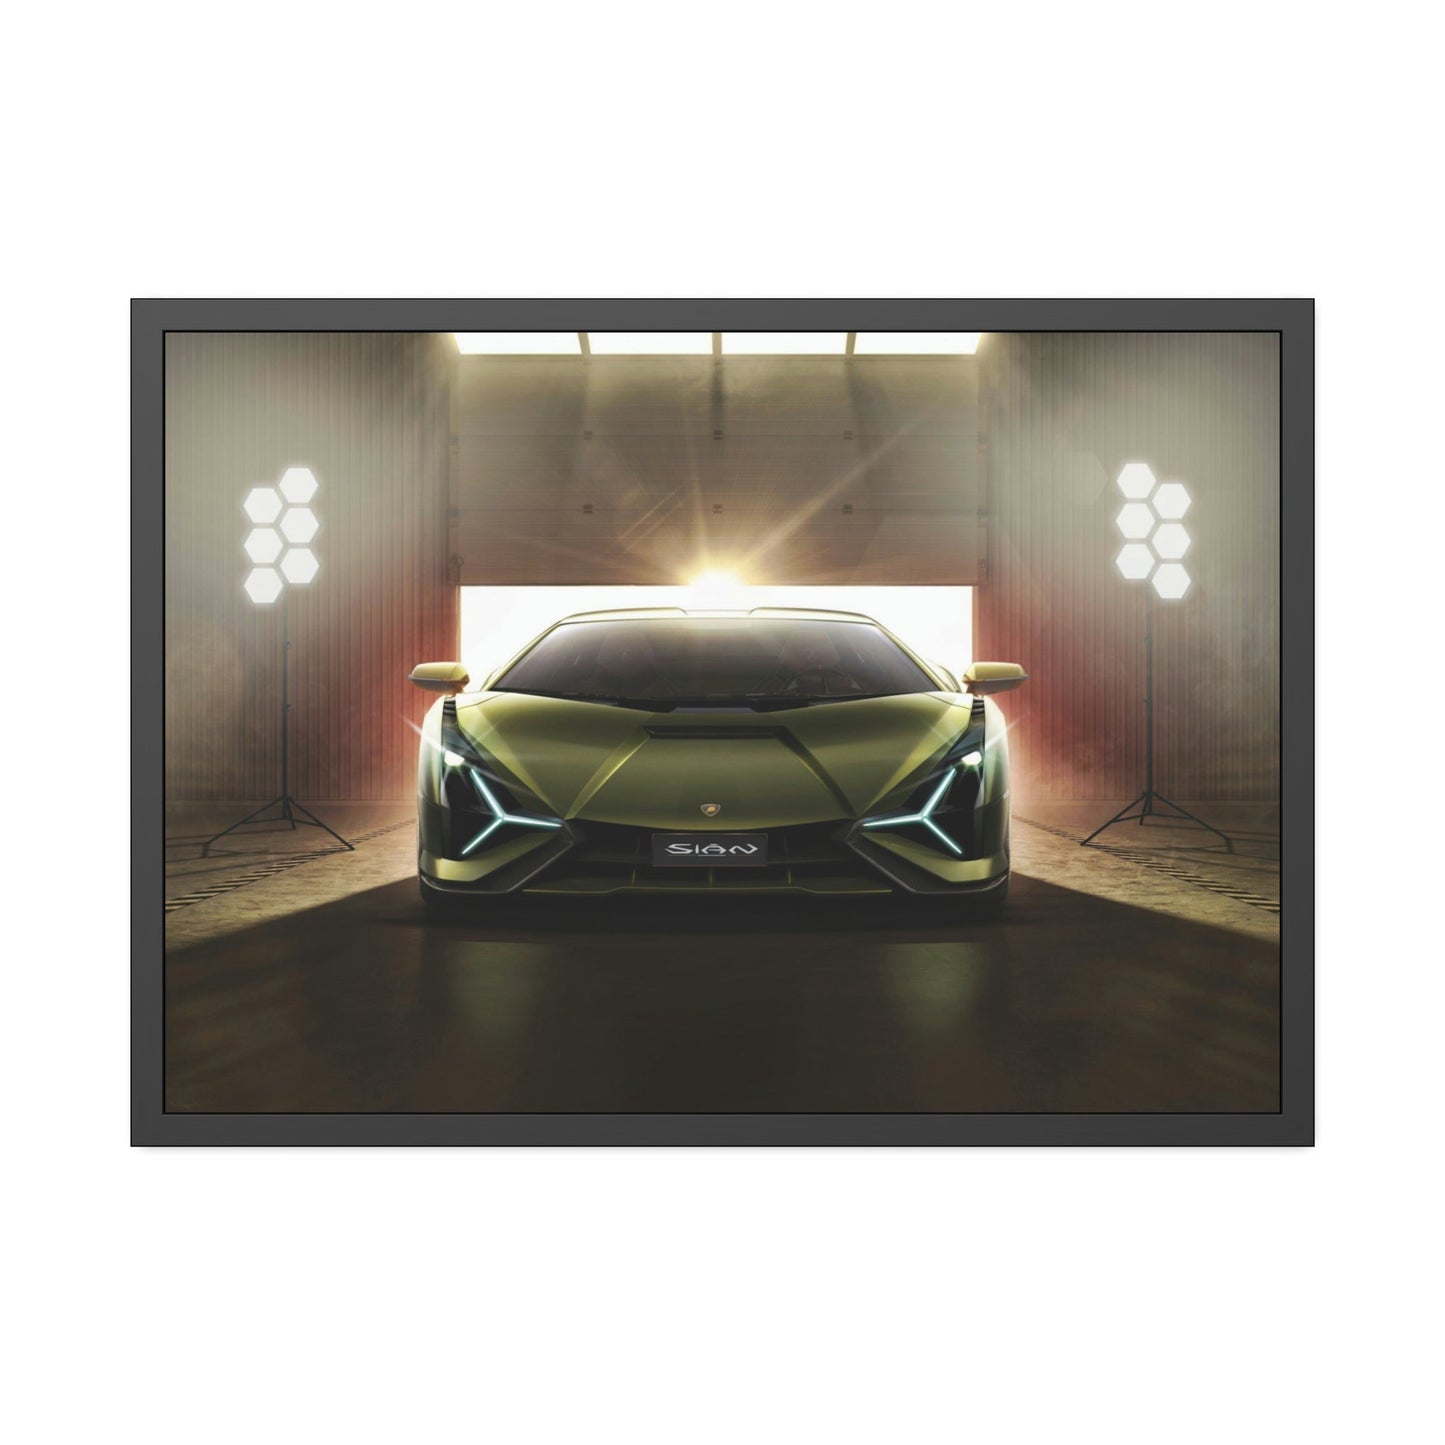 Sleek and Stylish: Modern Canvas Wall Art of Lamborghini for Your Home